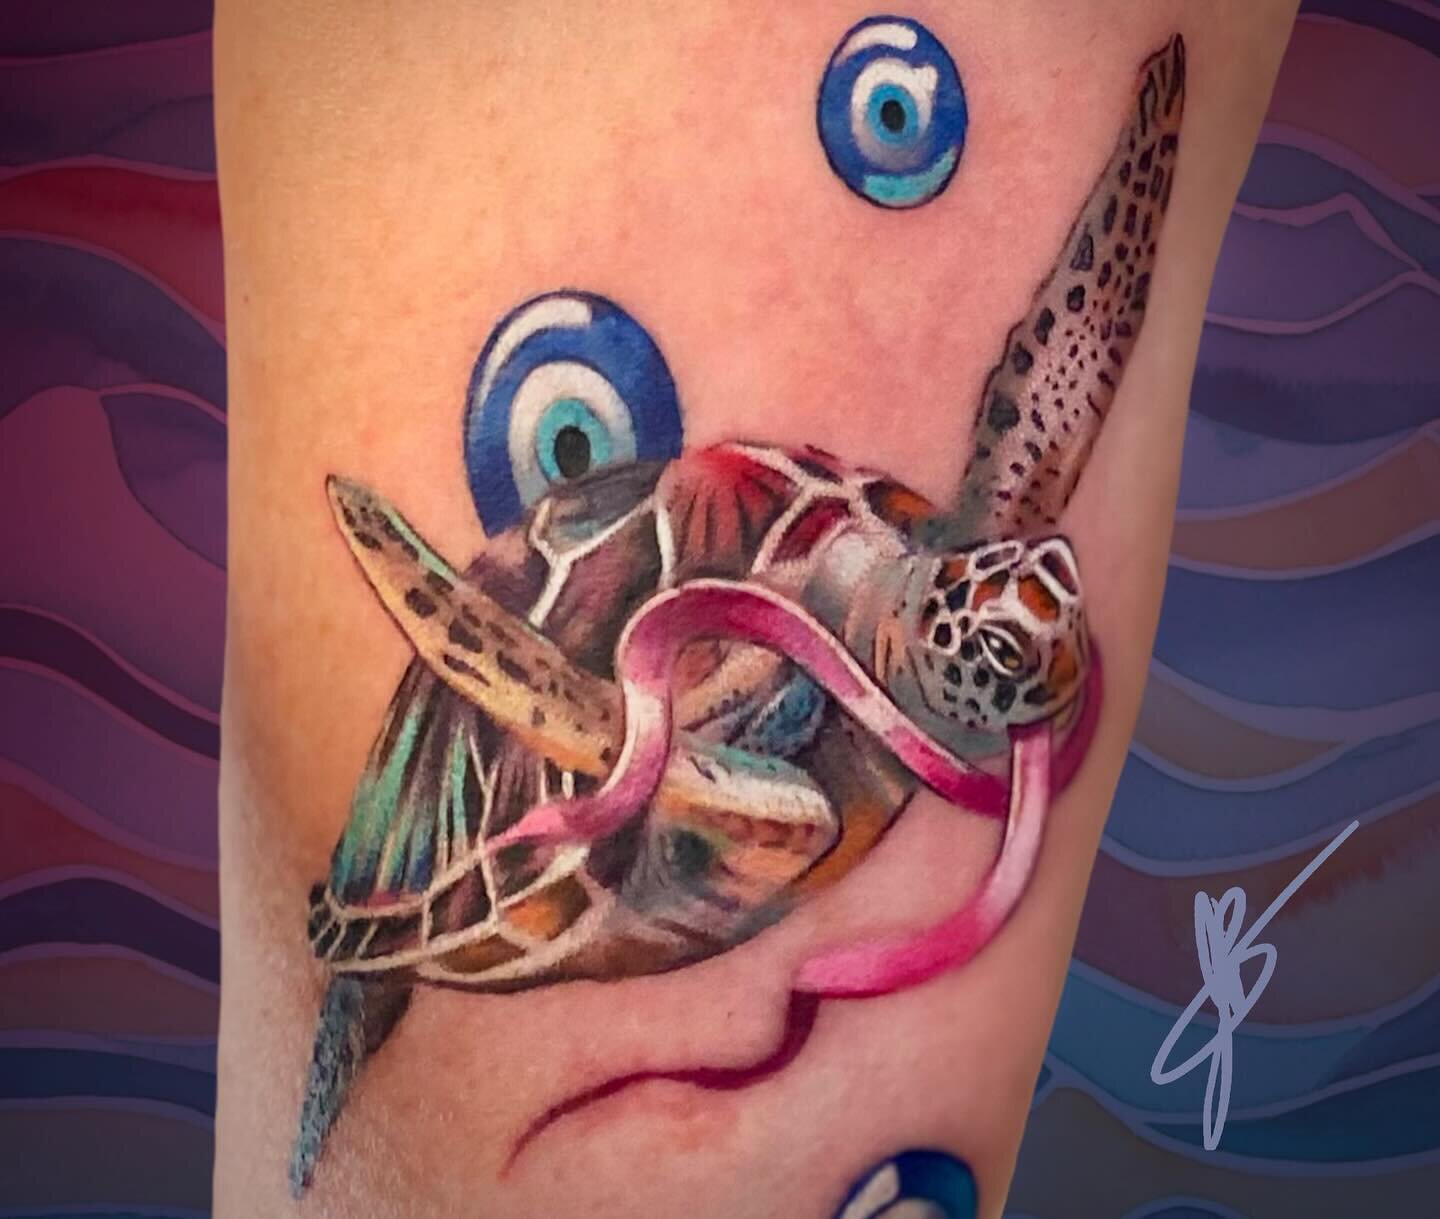 Here's a sea turtle with a breast cancer ribbon, and some Turkish eye bubbles.